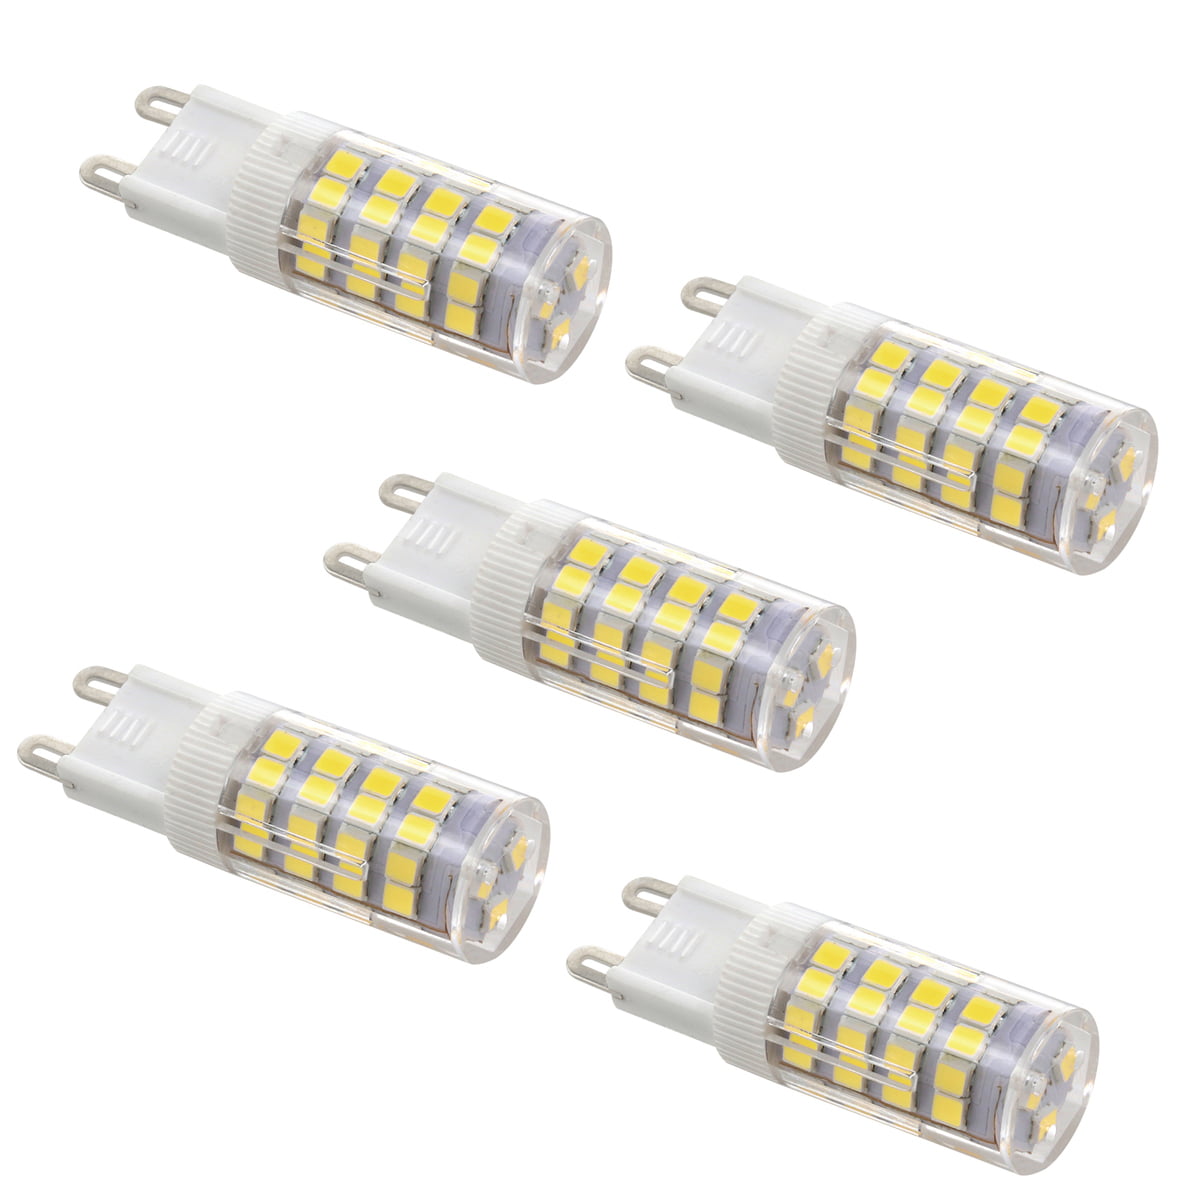 Light Source Color : Warm White, Voltage : 110V Lights Bulbs Dimmable 3W G9 LED Bulbs Lights T 14 SMD 2835 200 lm Warm White/Cool White 5 pcs 